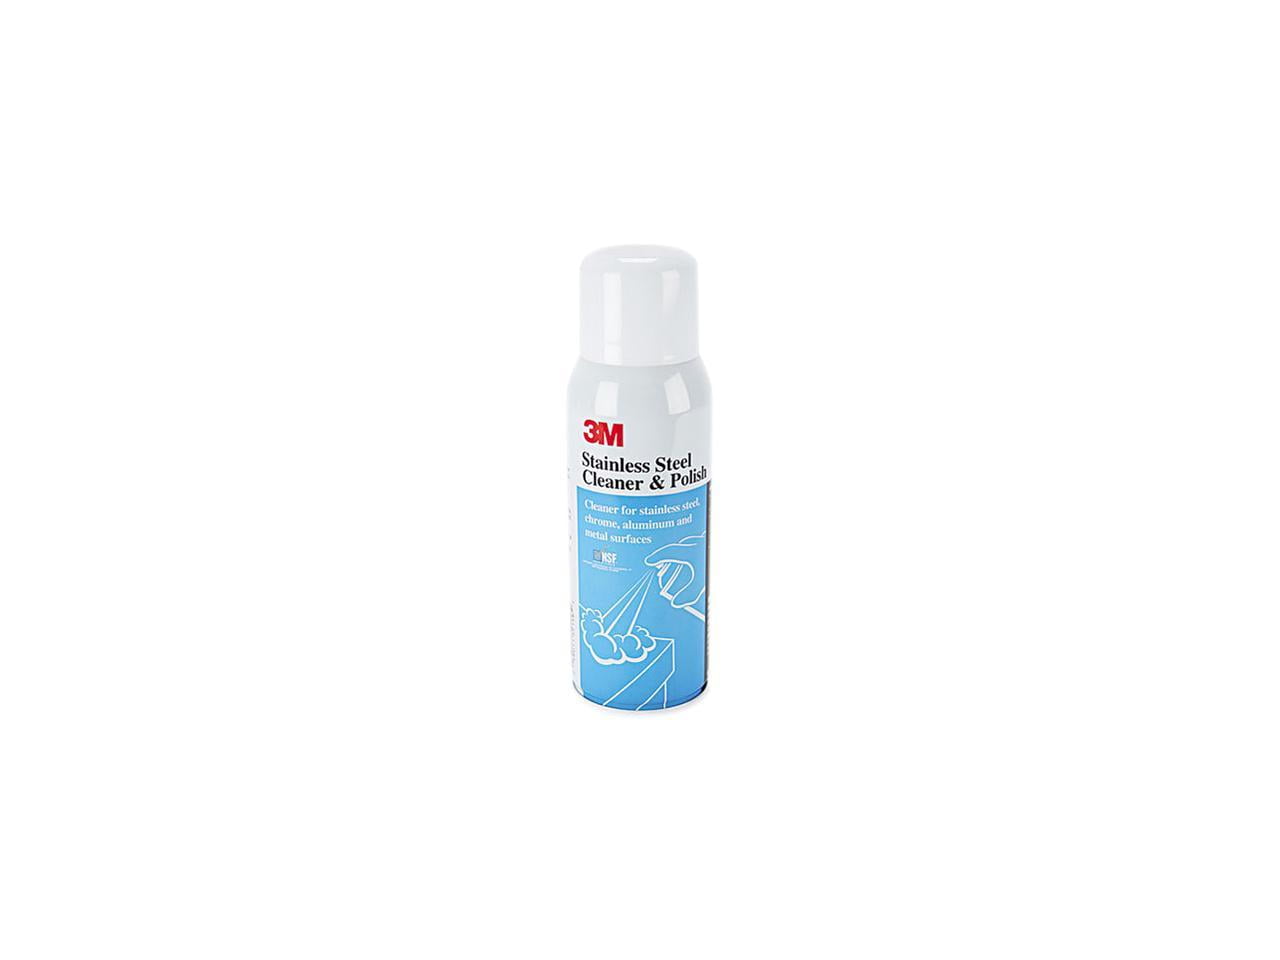 3m 14002 Stainless Steel Cleaner And Polish, 21 Oz